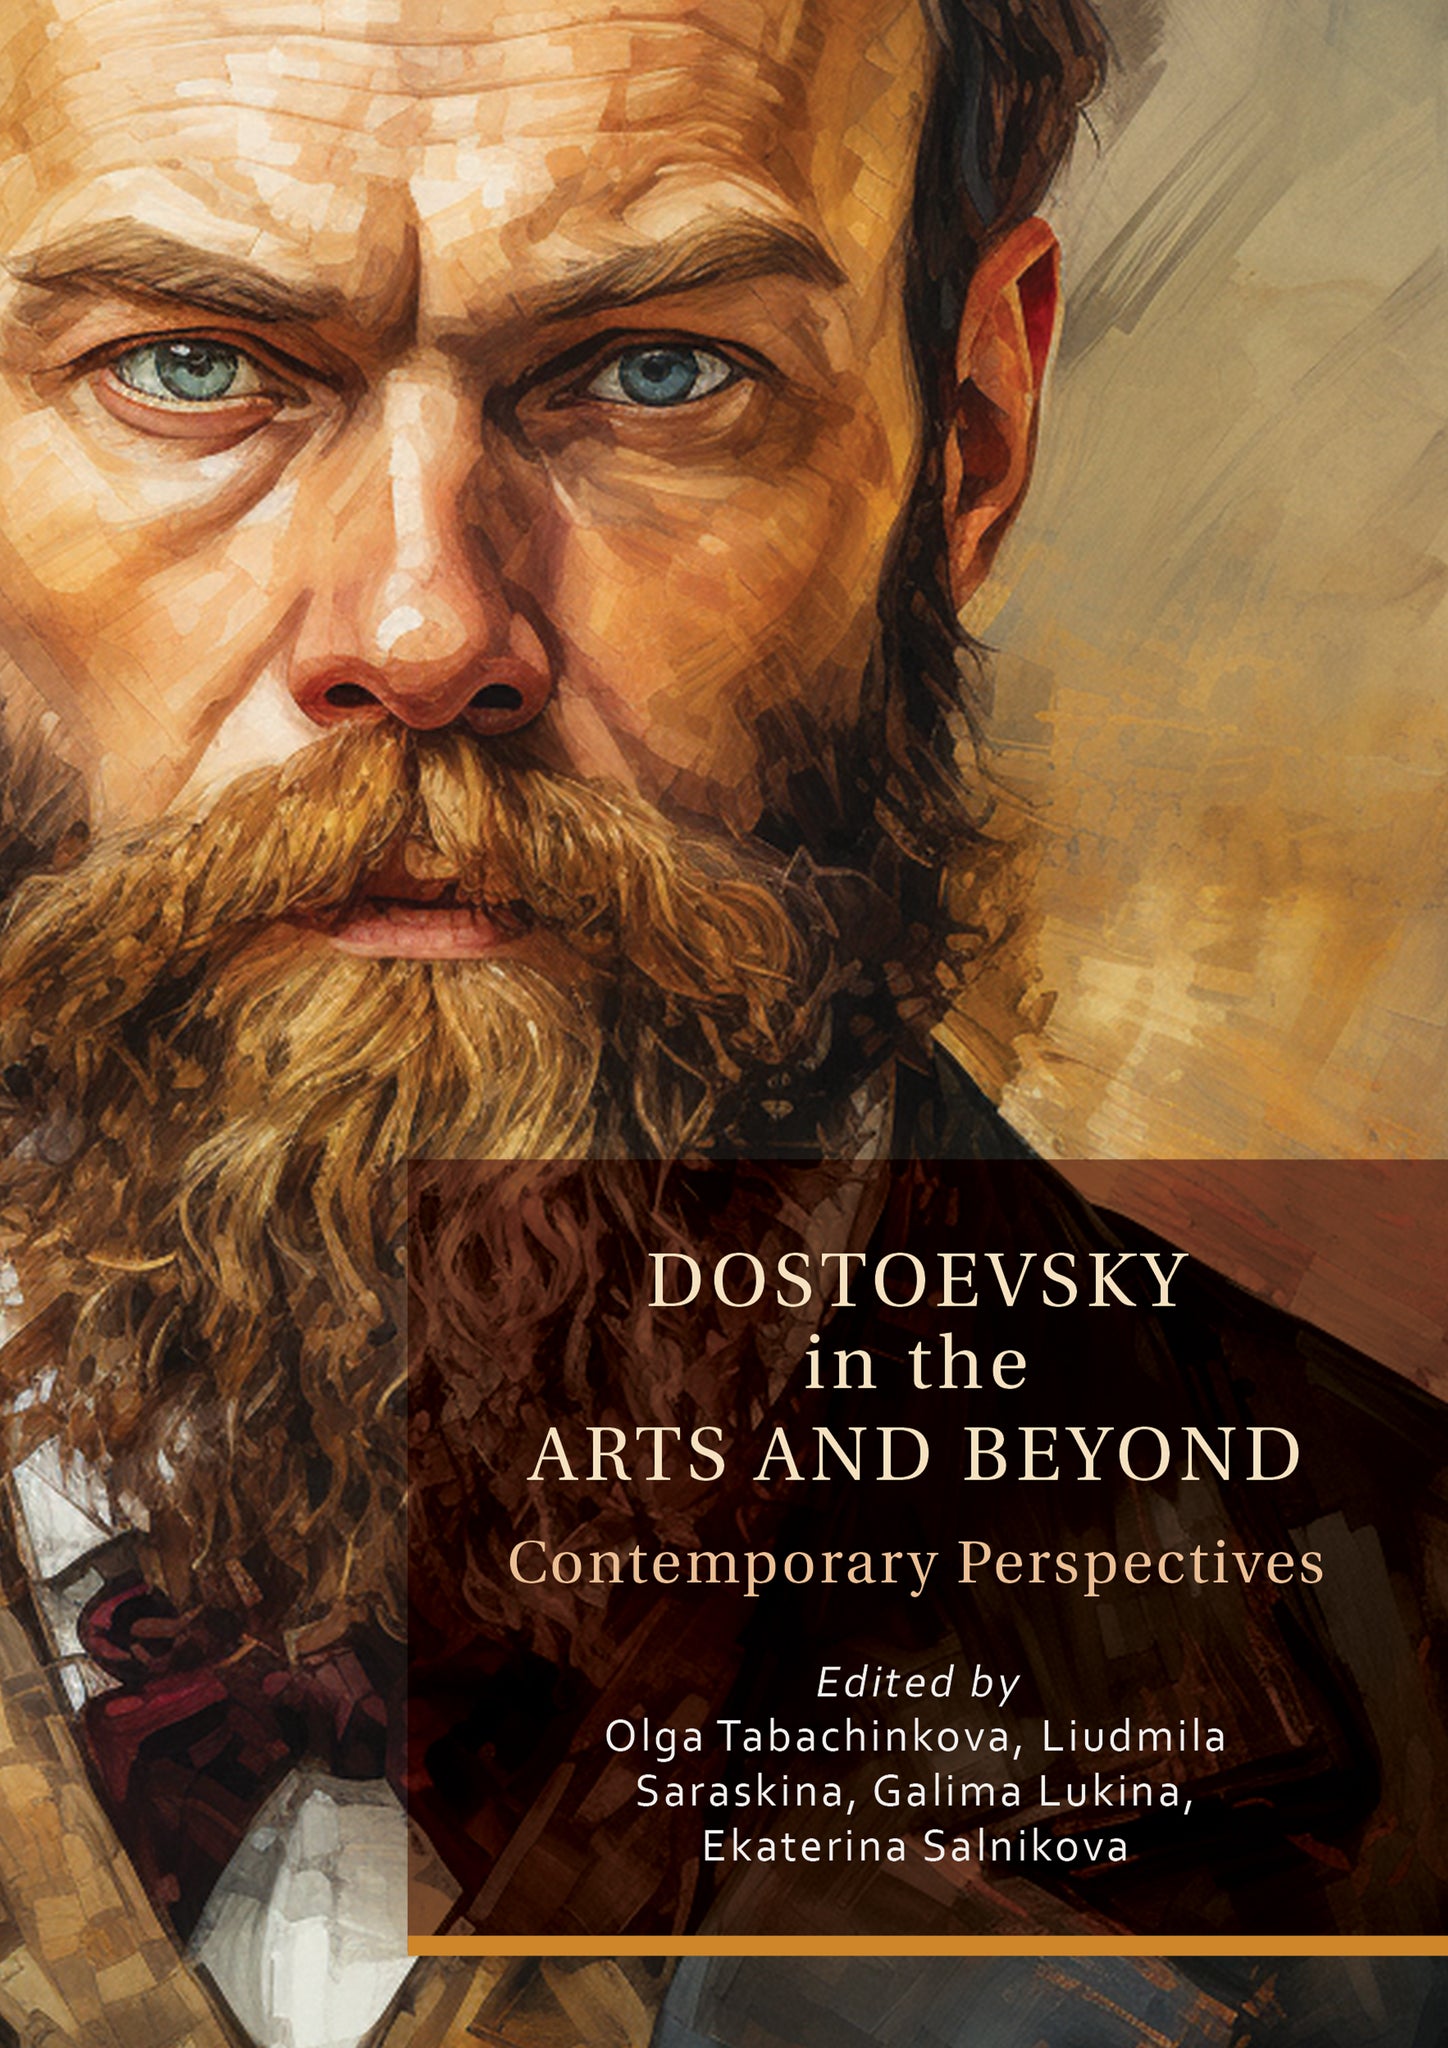 Dostoevsky in the Arts and Beyond: Contemporary Perspectives